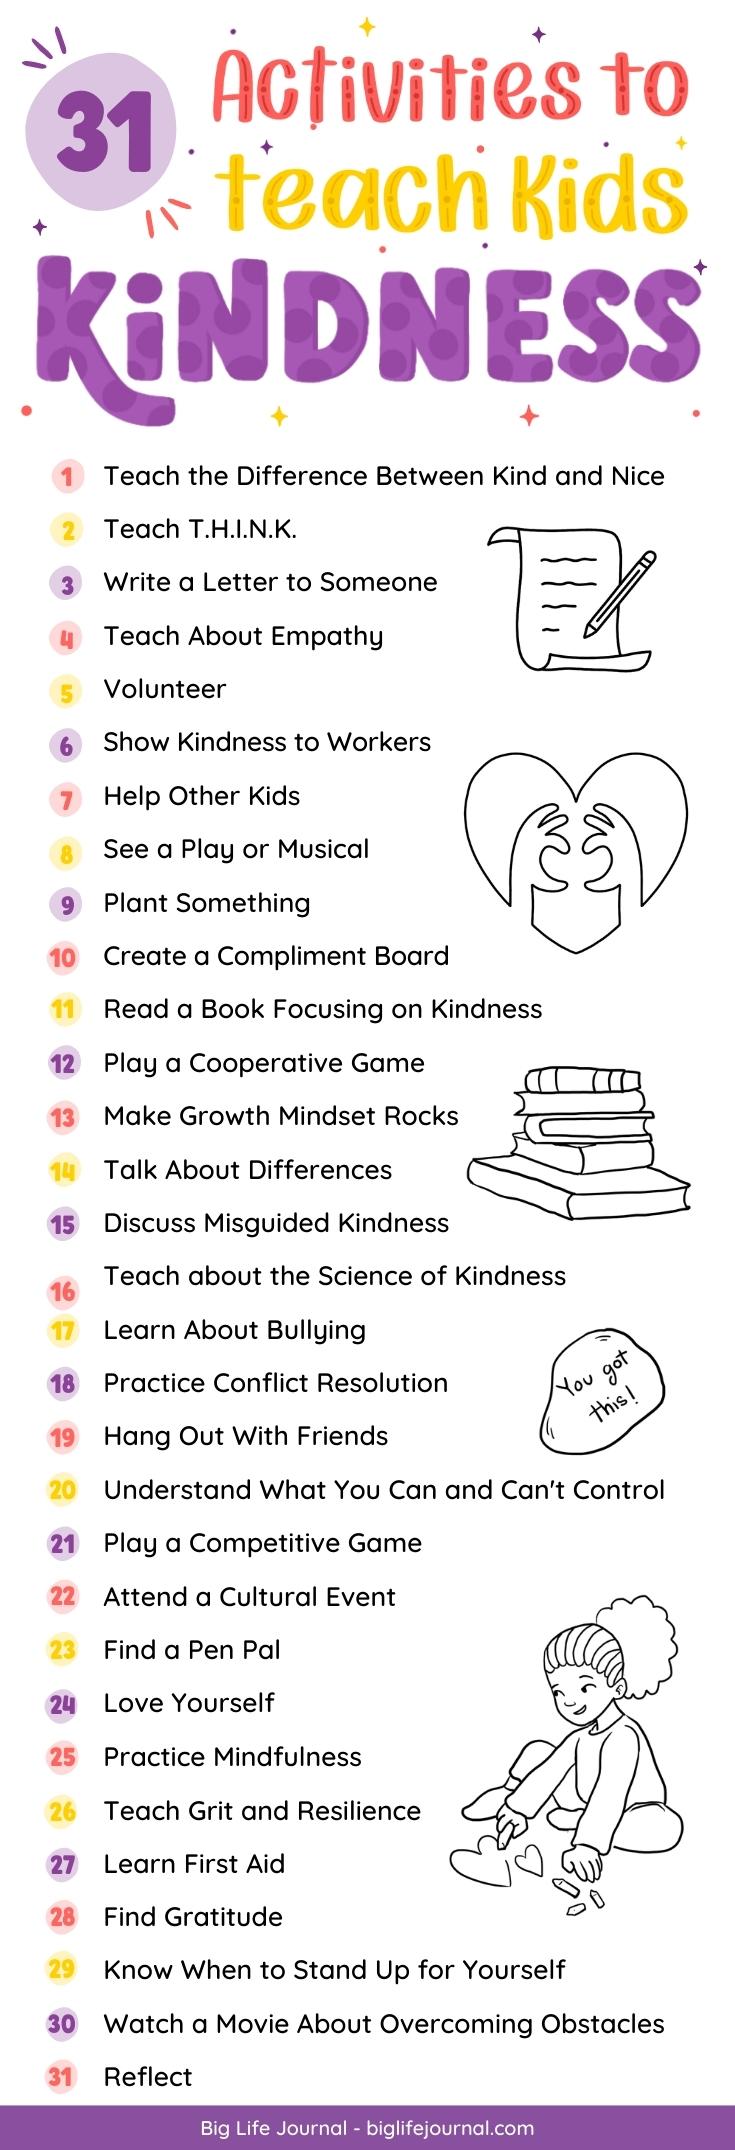 29 Daily Journal Prompts That Make Writing Fun For Kids